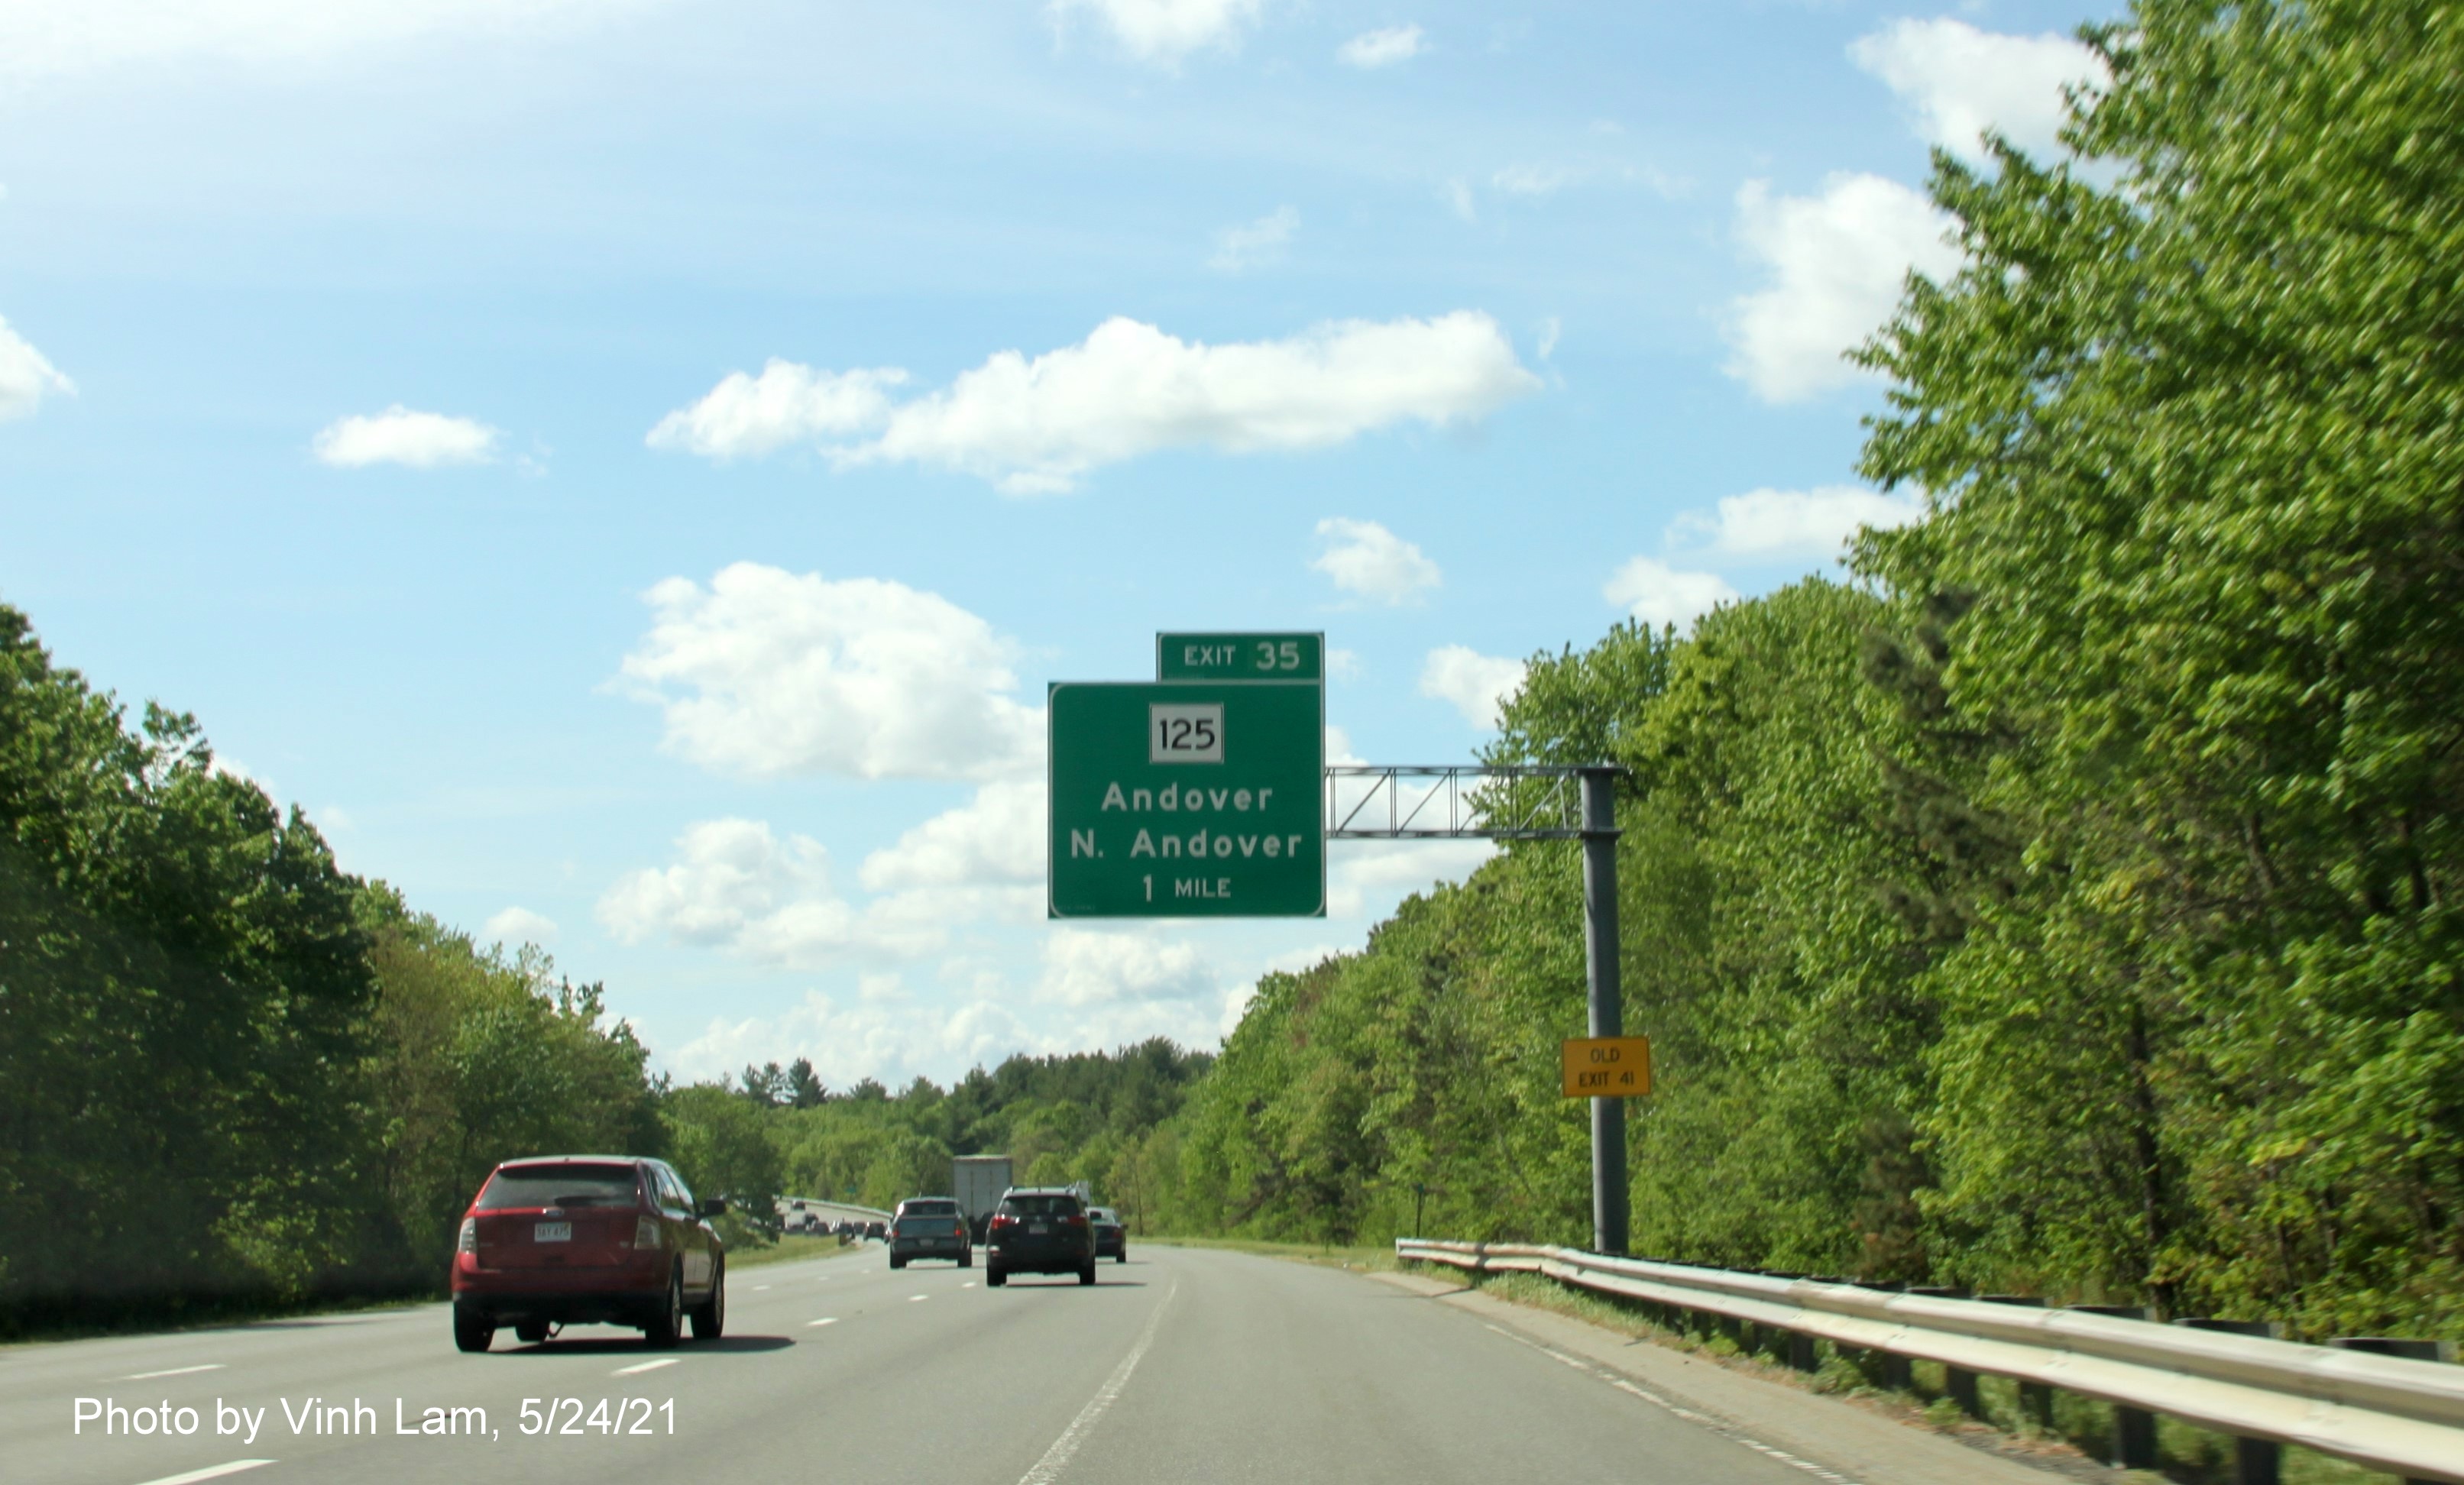 Image of 1 mile advance overhead sign for MA 125 exit with new milepost based exit number and yellow Old Exit 41 advisory sign on support on I-93 South in Wilmington, by Vinh Lam, May 2021